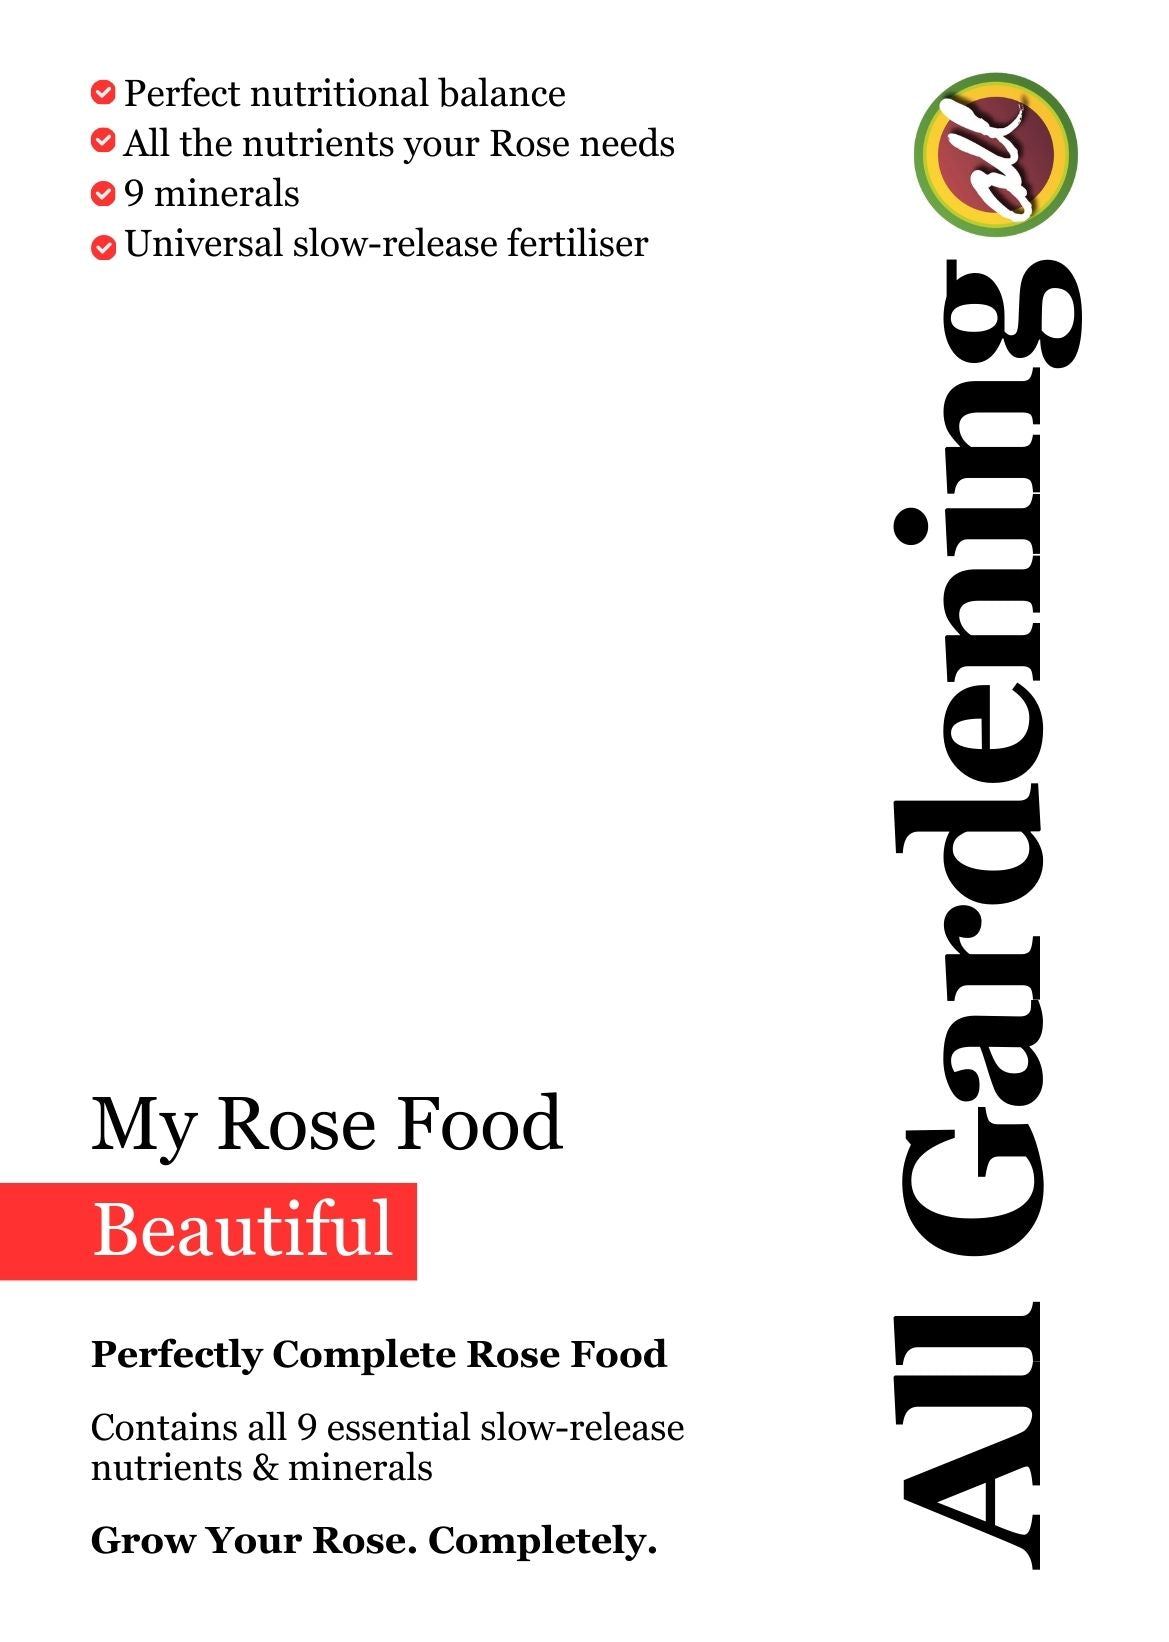 MY ROSE FOOD Subscription